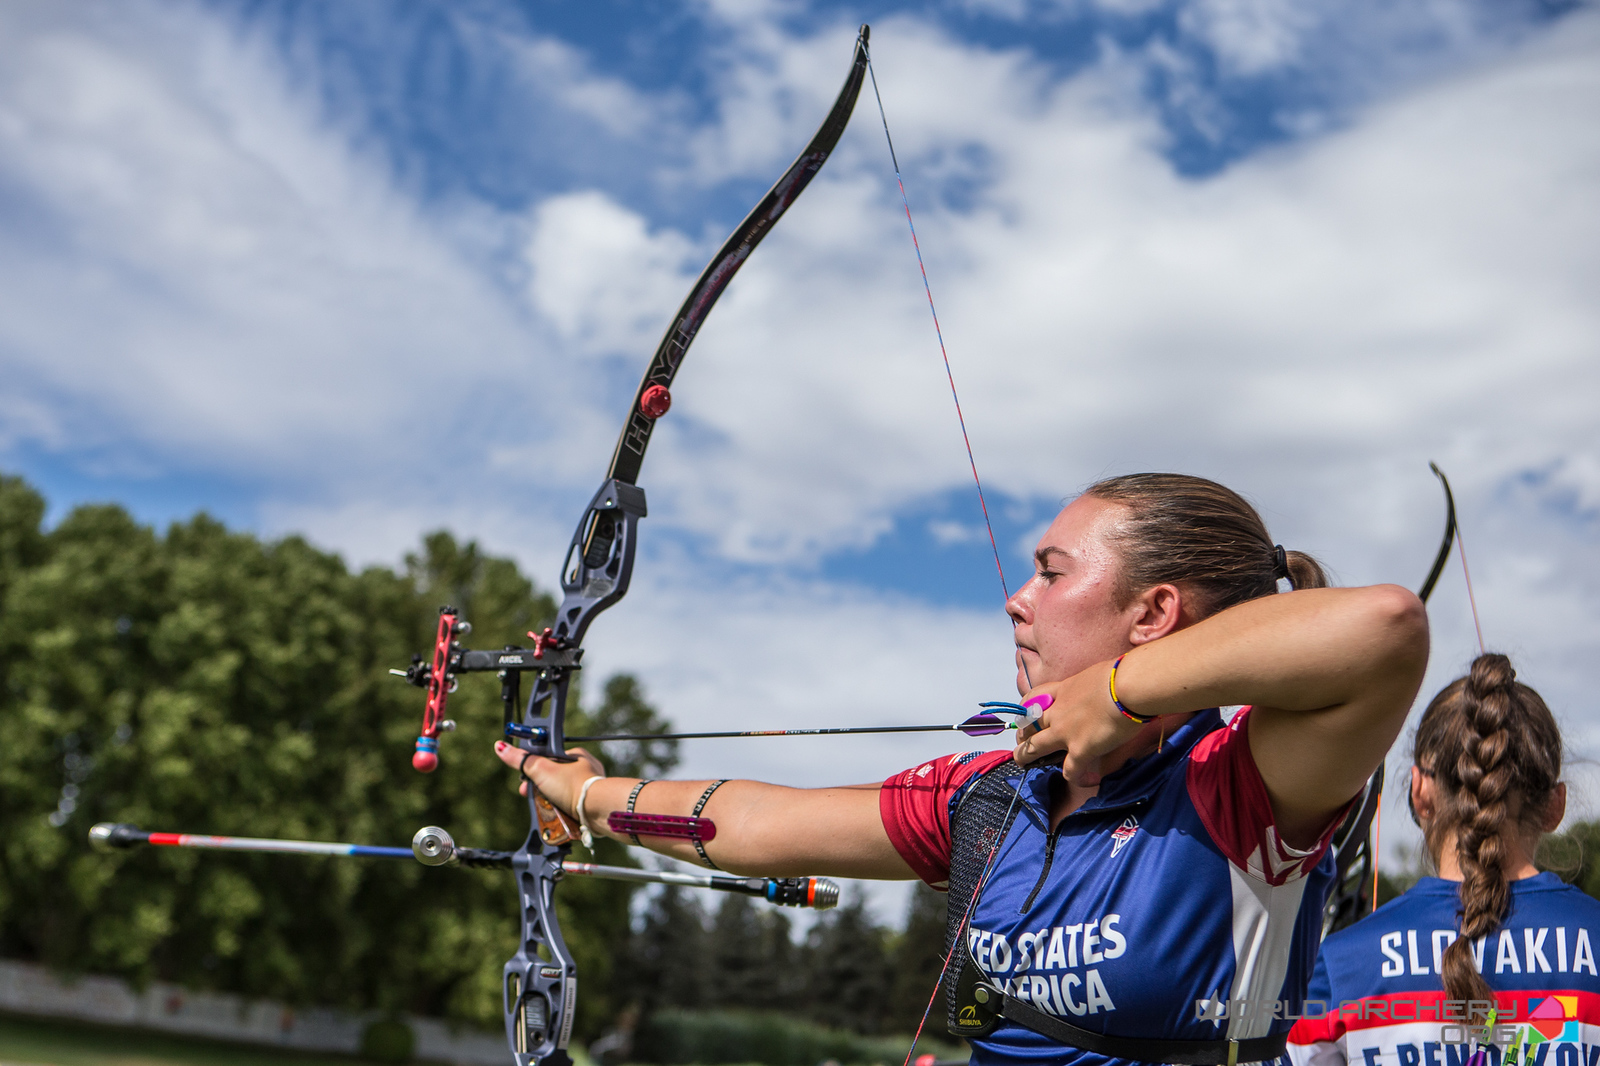 Team USA Strong at World Archery Youth Championships Qualification